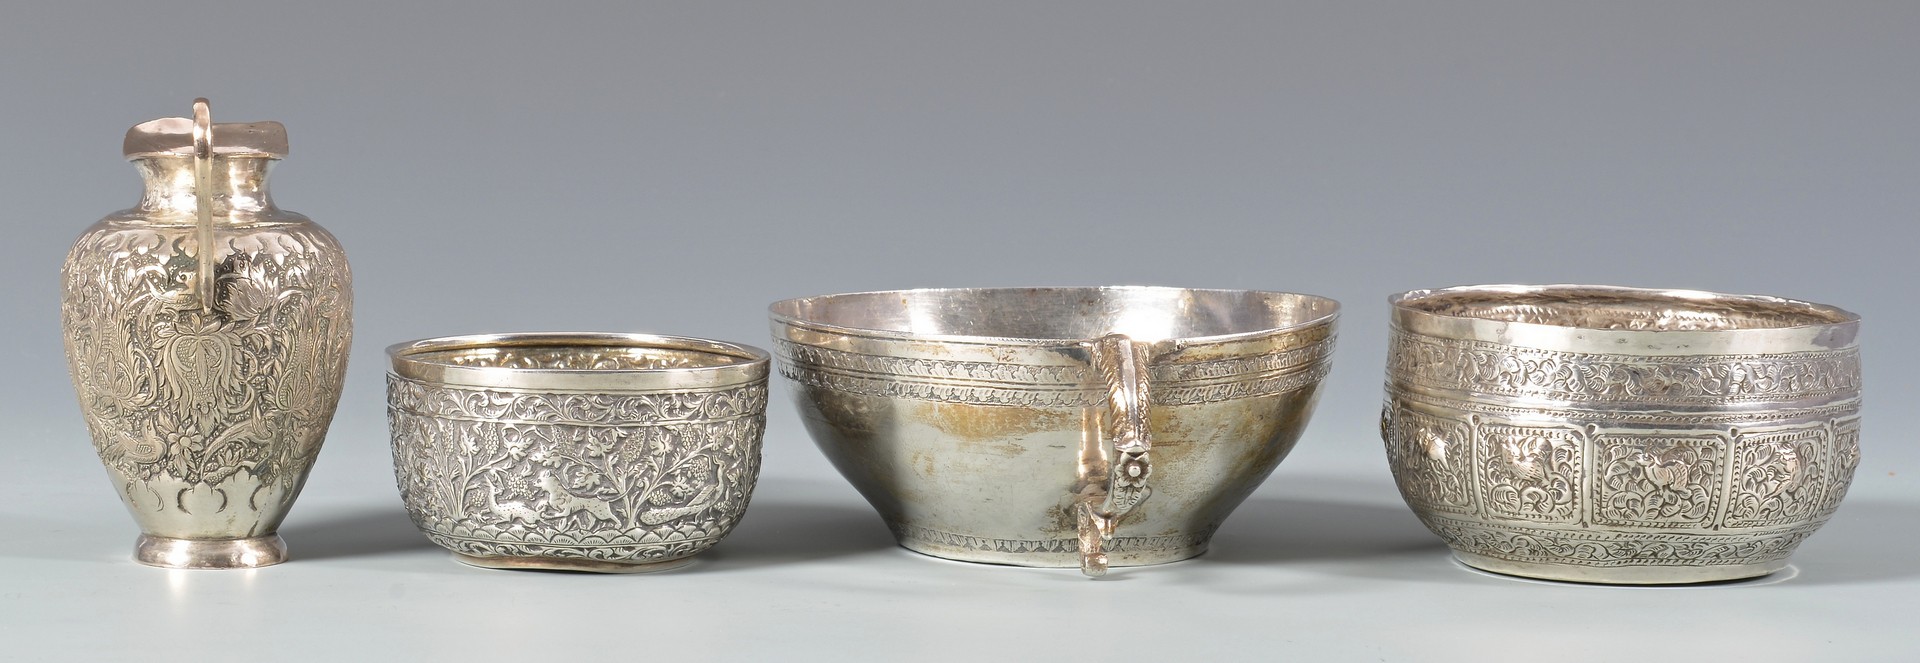 Lot 44: Exotic silver, most Southeast Asian